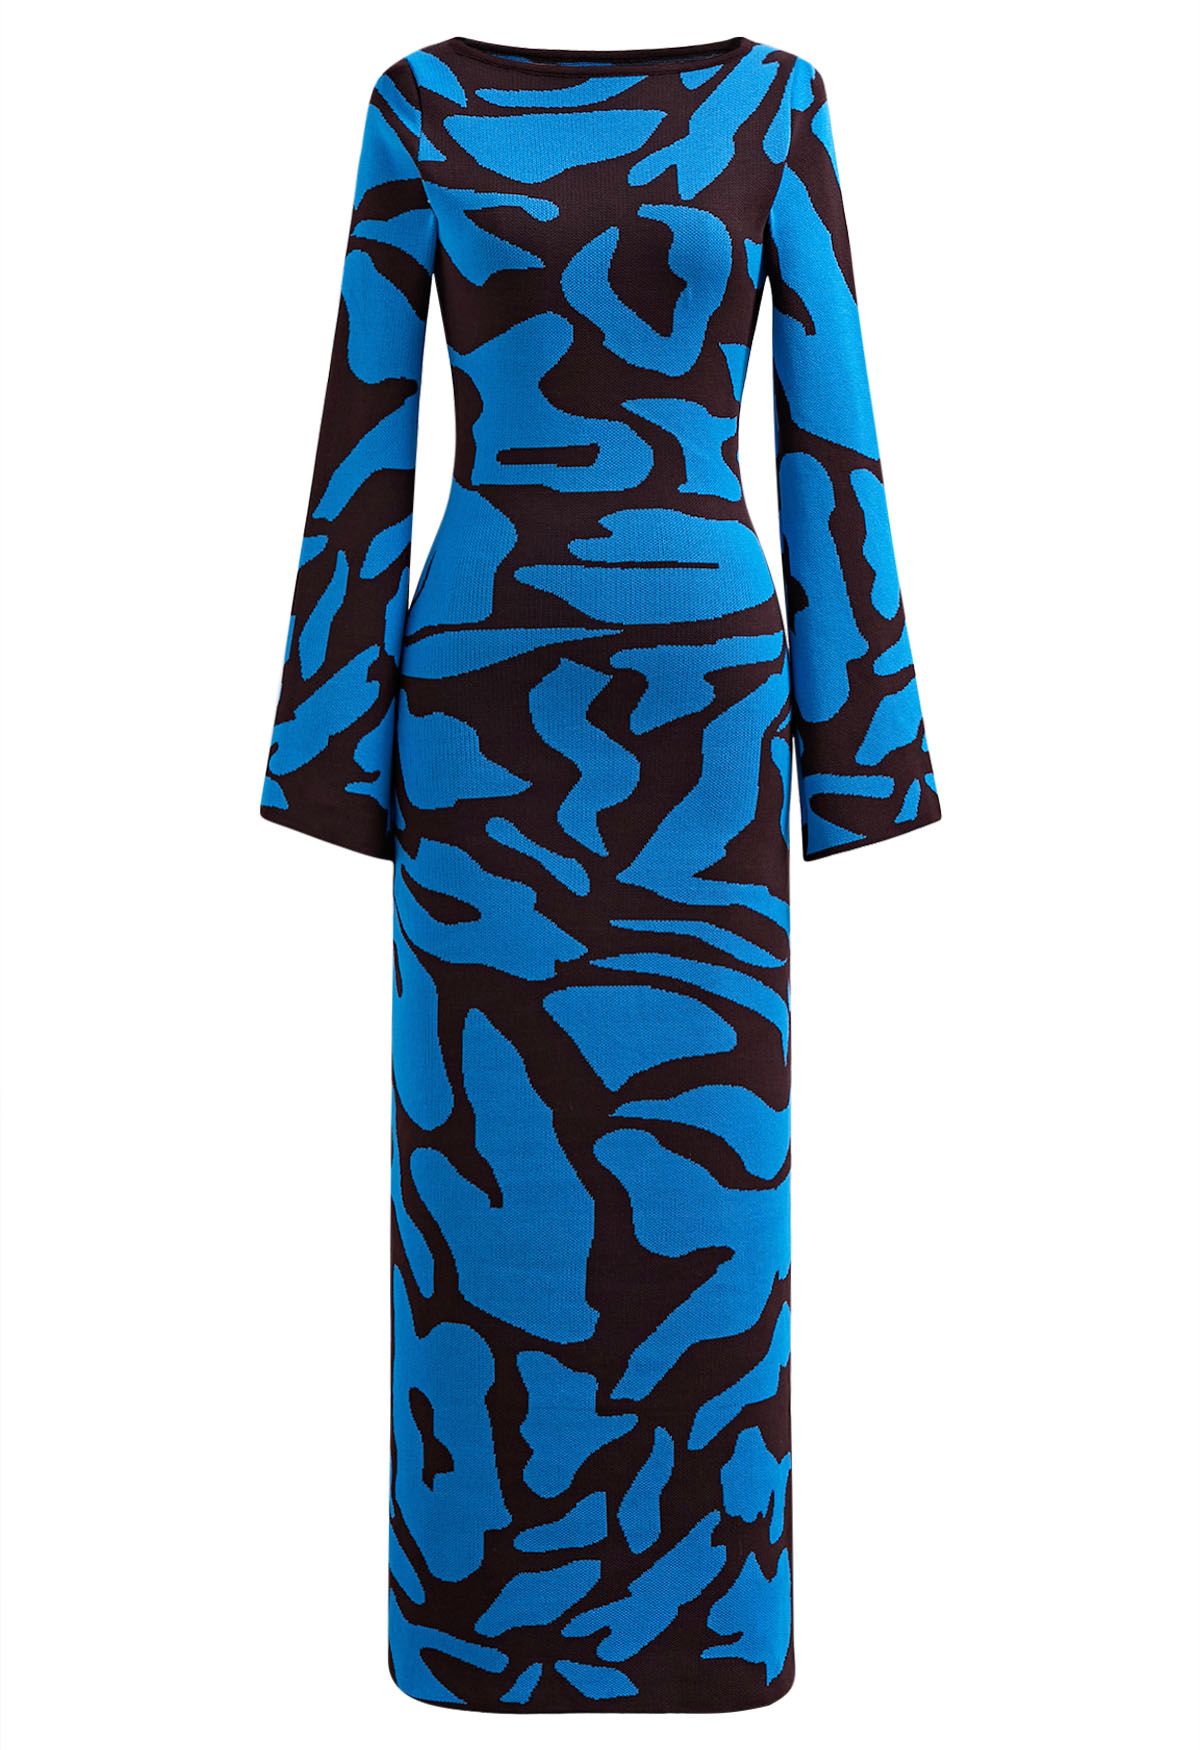 Graphic Print Fitted Knit Maxi Dress - Retro, Indie and Unique Fashion